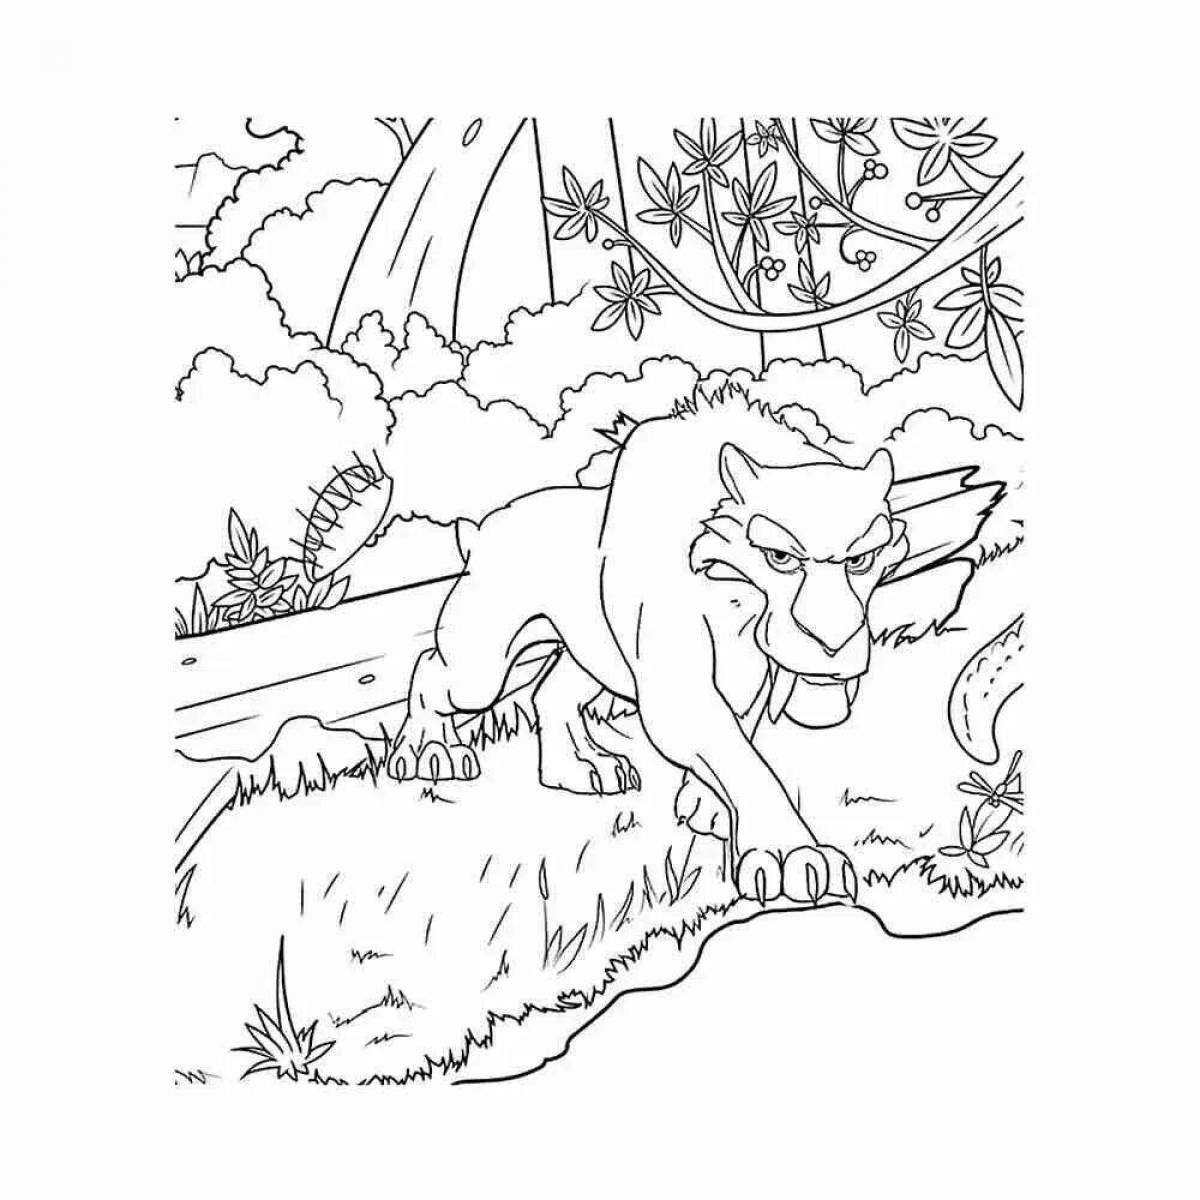 Fun saber-toothed tiger coloring book for kids